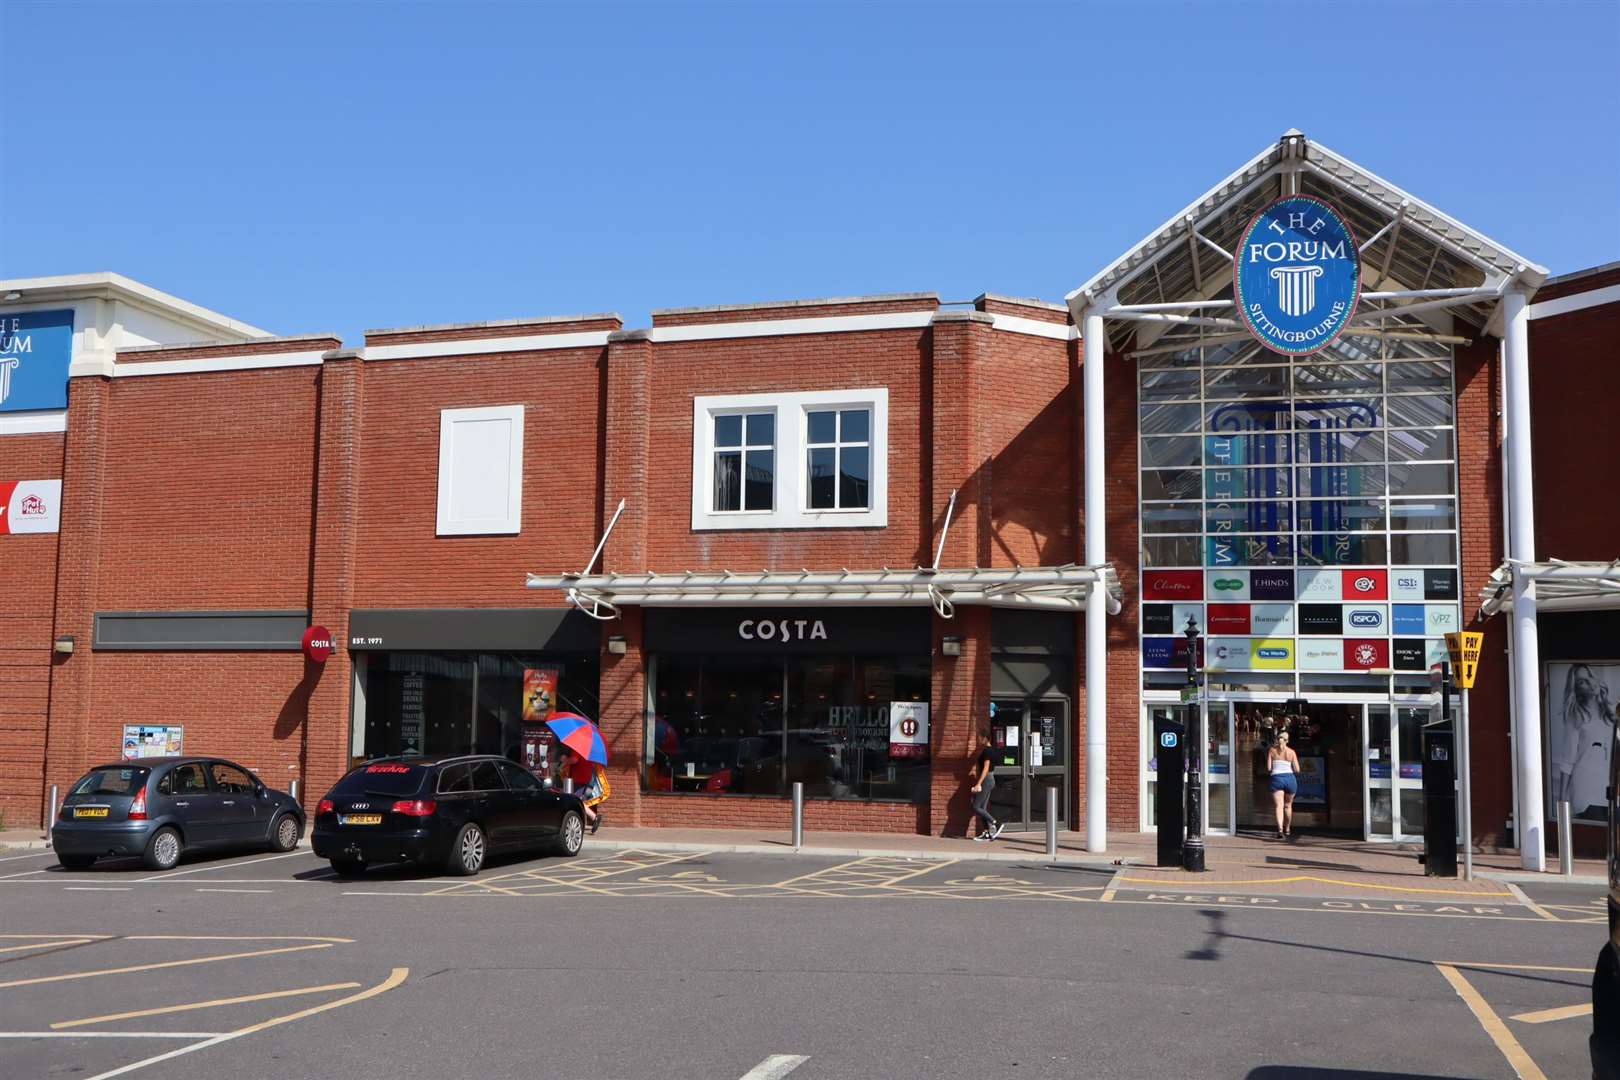 The car park outside the Forum shopping centre would be turned into a public green space as part of Swale council's Sittingbourne town centre revival plan